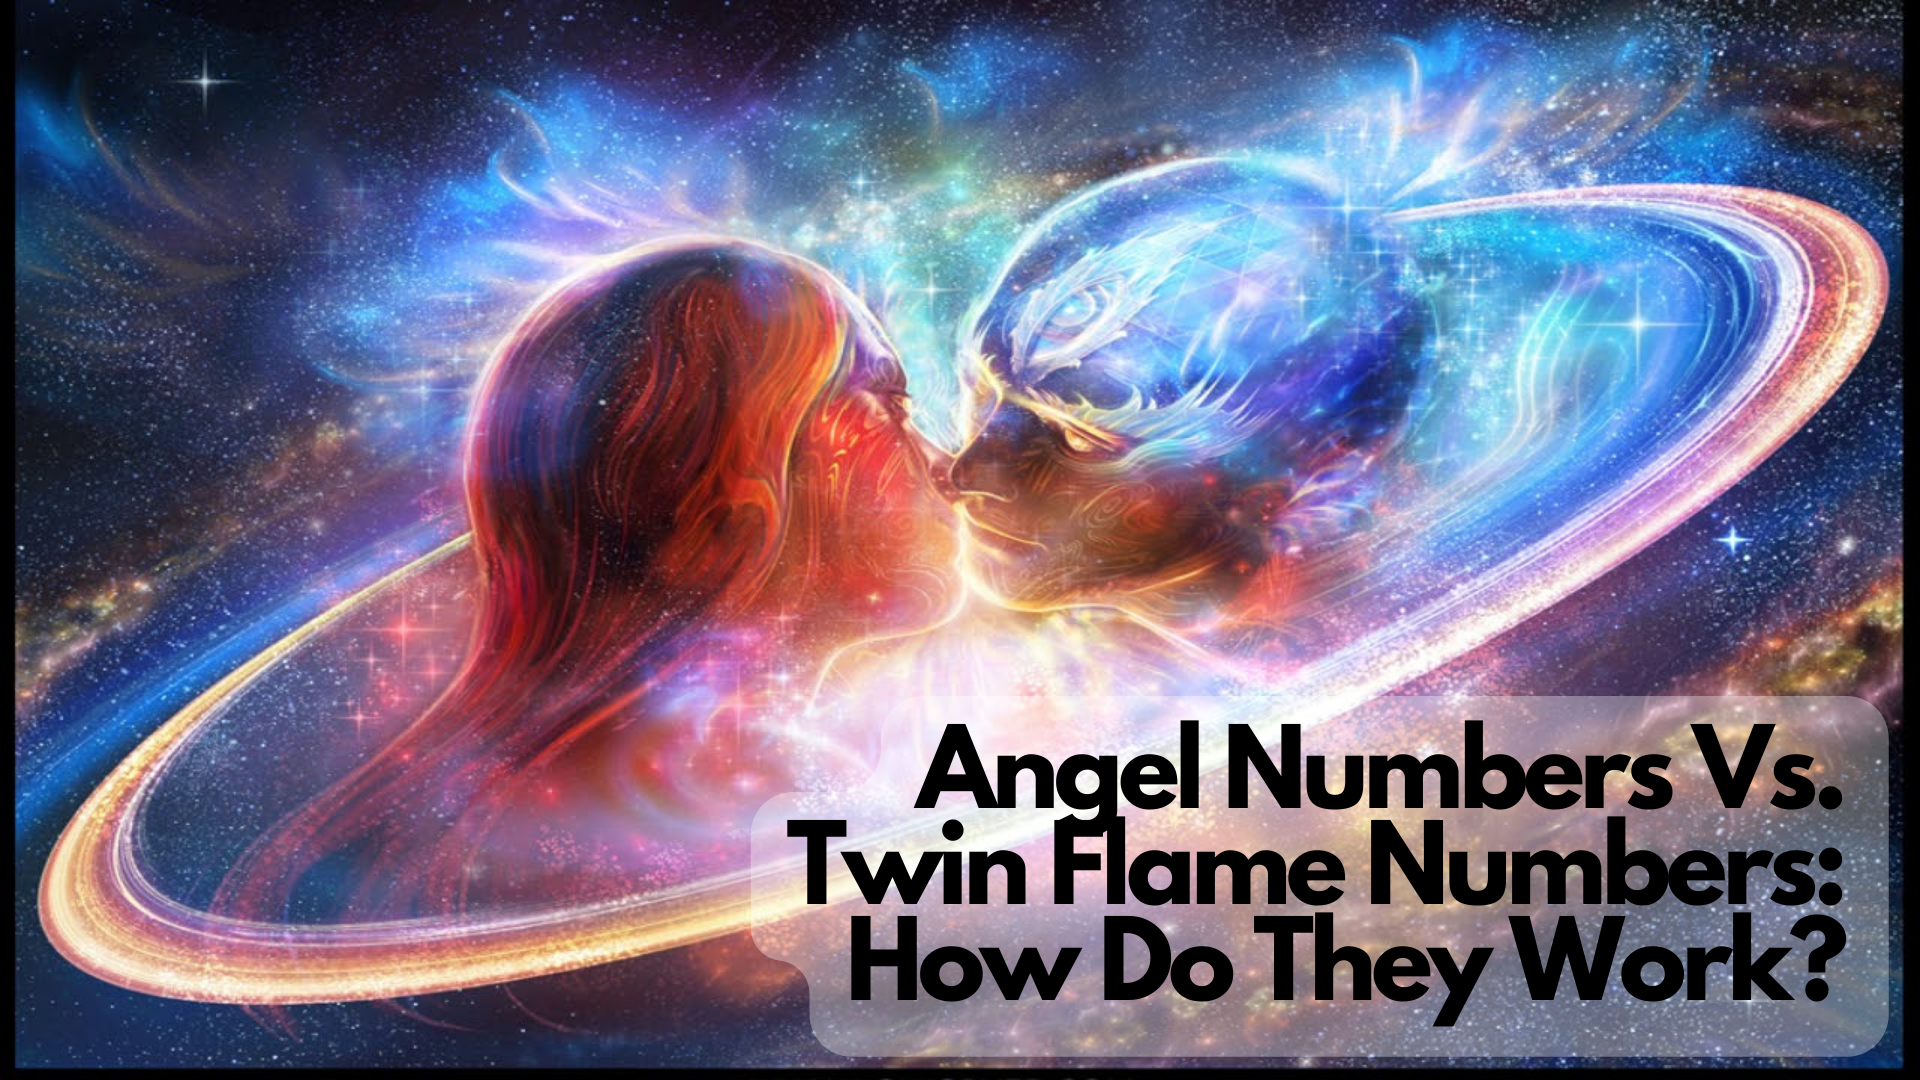 A man and woman kissing in space with words Angel Numbers Vs. Twin Flame Numbers: How Do They Work